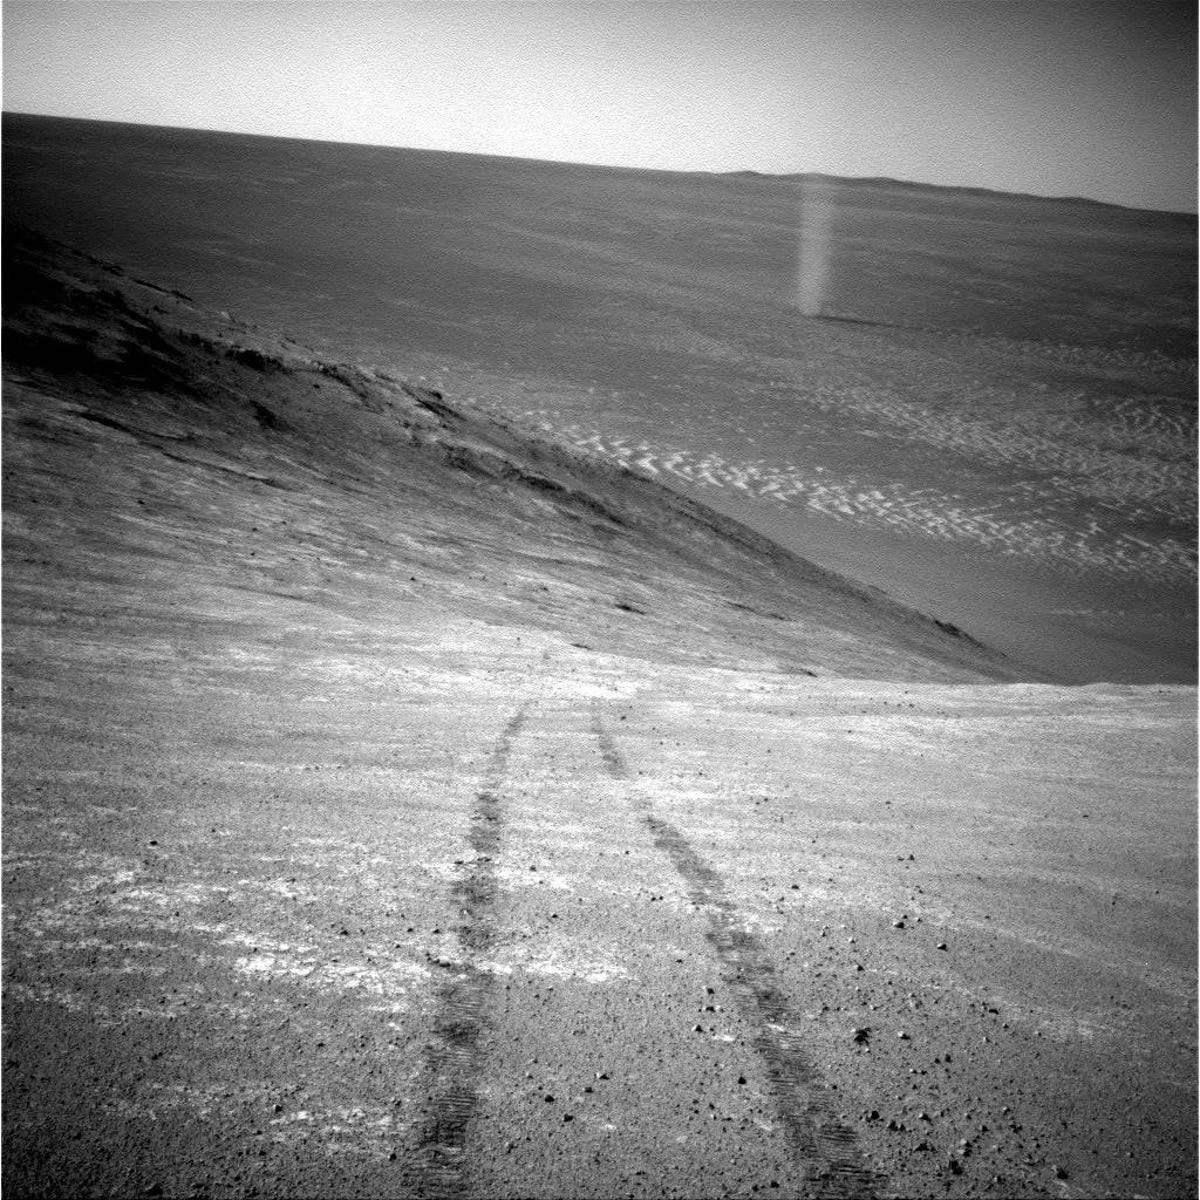 Scenic black and white landscape image with parallel rover wheels tracks and column of a dust devil in the distance.